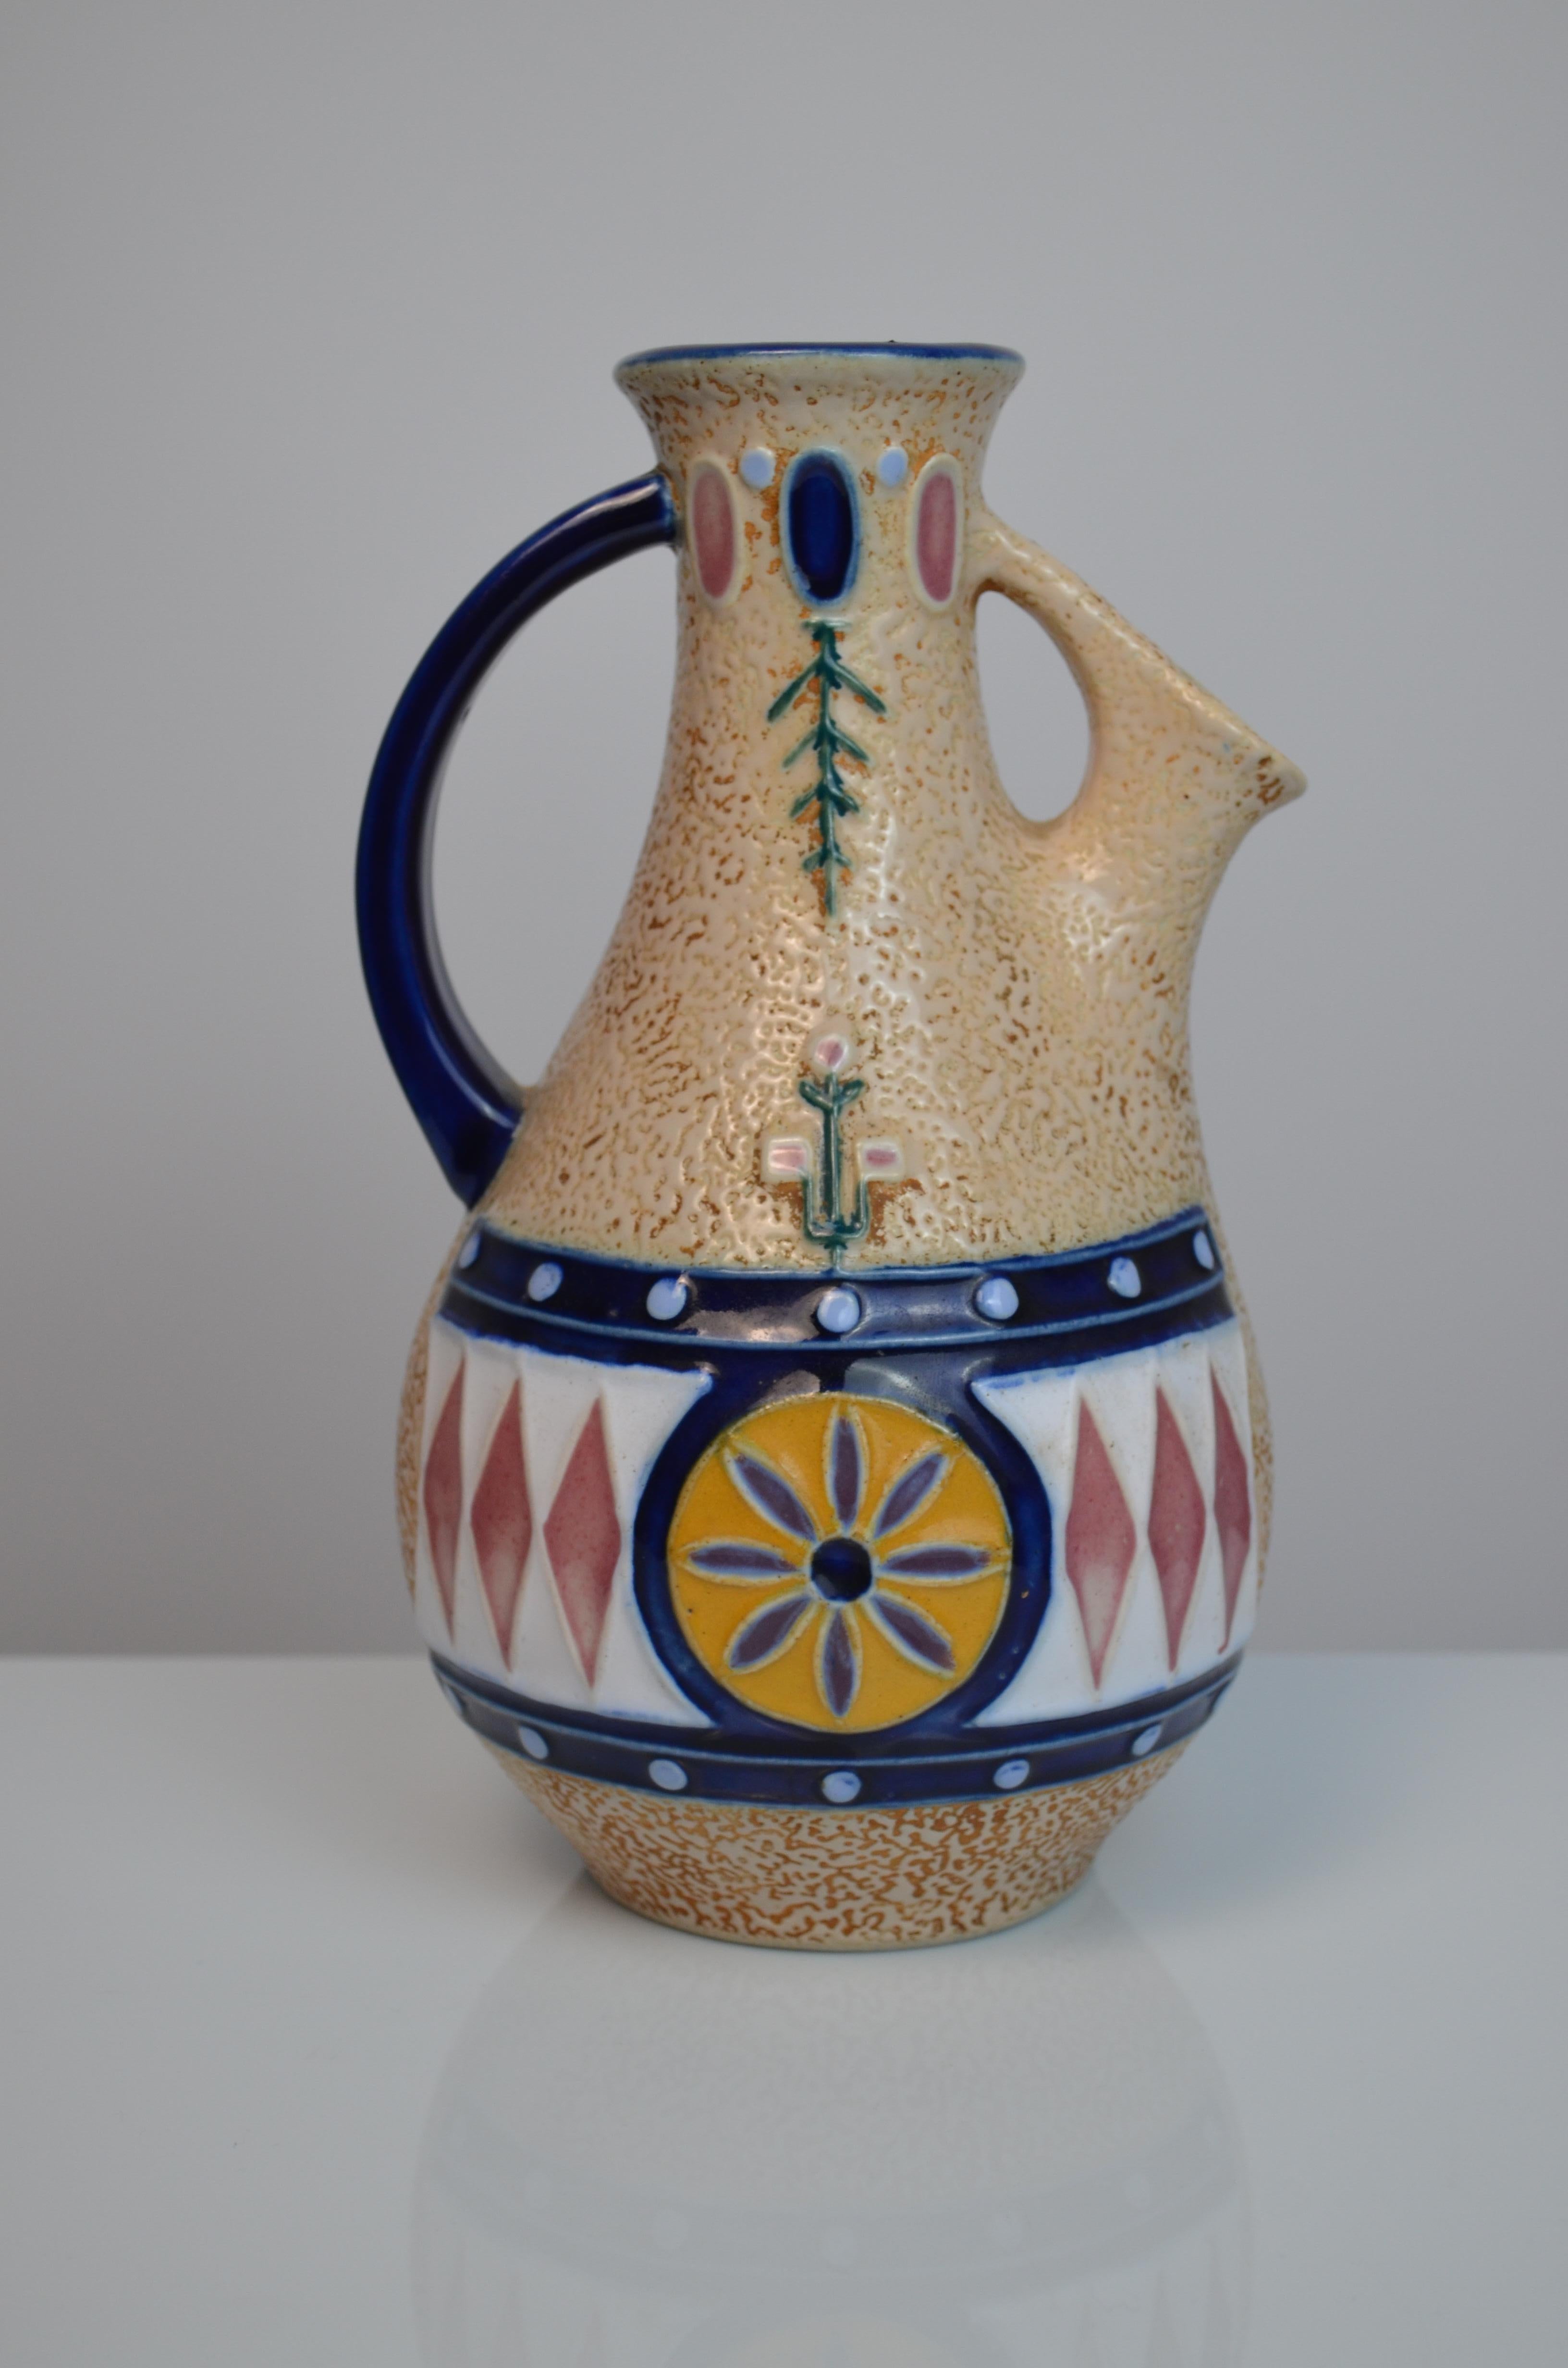 Czechoslovakian glazed ceramic pitcher by the Amphora manufacturer, 1920s-1930s
Art Deco style.
Amazing condition and design in relation to its age.
Signed under the base.